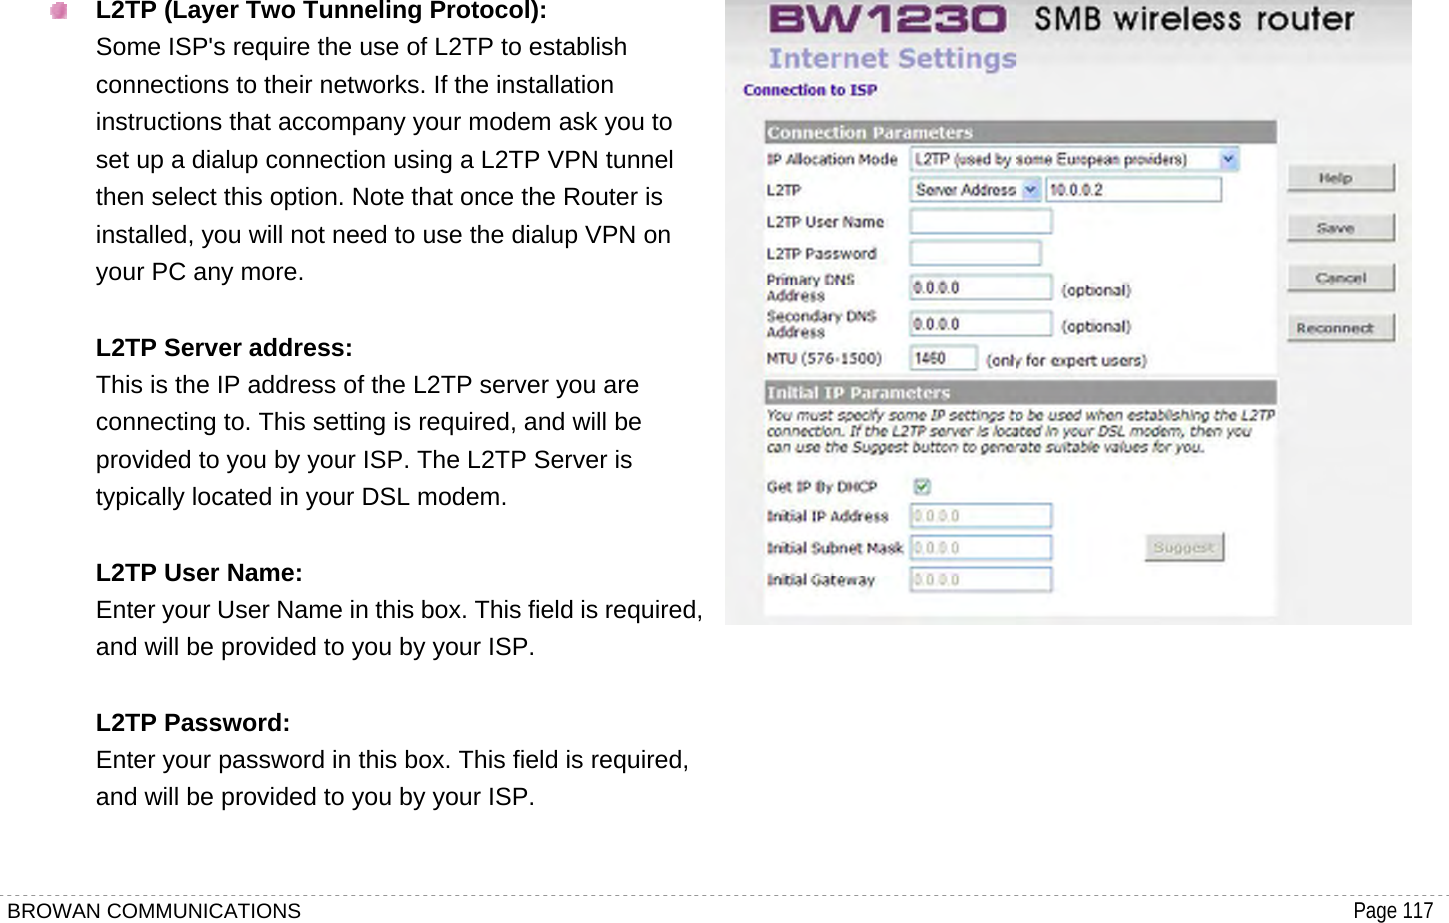 BROWAN COMMUNICATIONS                                                                                           Page 117   L2TP (Layer Two Tunneling Protocol): Some ISP&apos;s require the use of L2TP to establish connections to their networks. If the installation instructions that accompany your modem ask you to set up a dialup connection using a L2TP VPN tunnel then select this option. Note that once the Router is installed, you will not need to use the dialup VPN on your PC any more.  L2TP Server address: This is the IP address of the L2TP server you are connecting to. This setting is required, and will be provided to you by your ISP. The L2TP Server is typically located in your DSL modem.  L2TP User Name: Enter your User Name in this box. This field is required, and will be provided to you by your ISP.  L2TP Password: Enter your password in this box. This field is required, and will be provided to you by your ISP.   